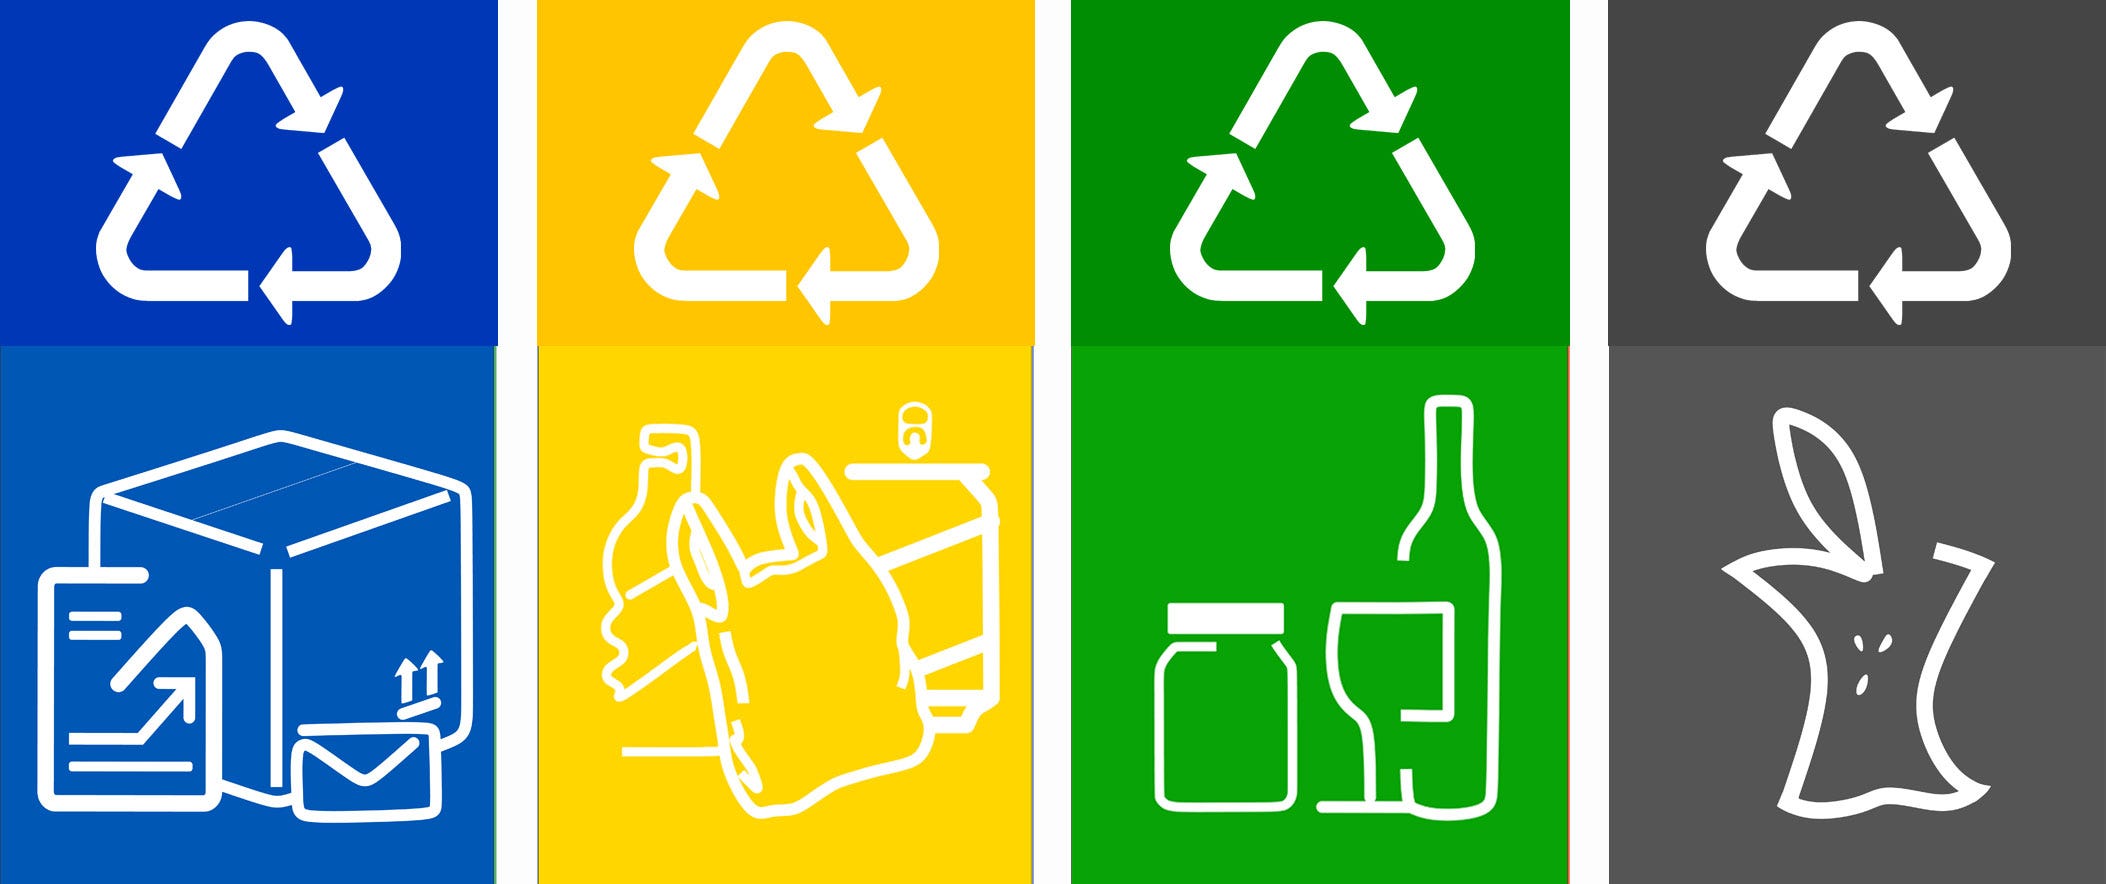 Free Printable Recycling Labels For Bins By Razvan D Toma Medium